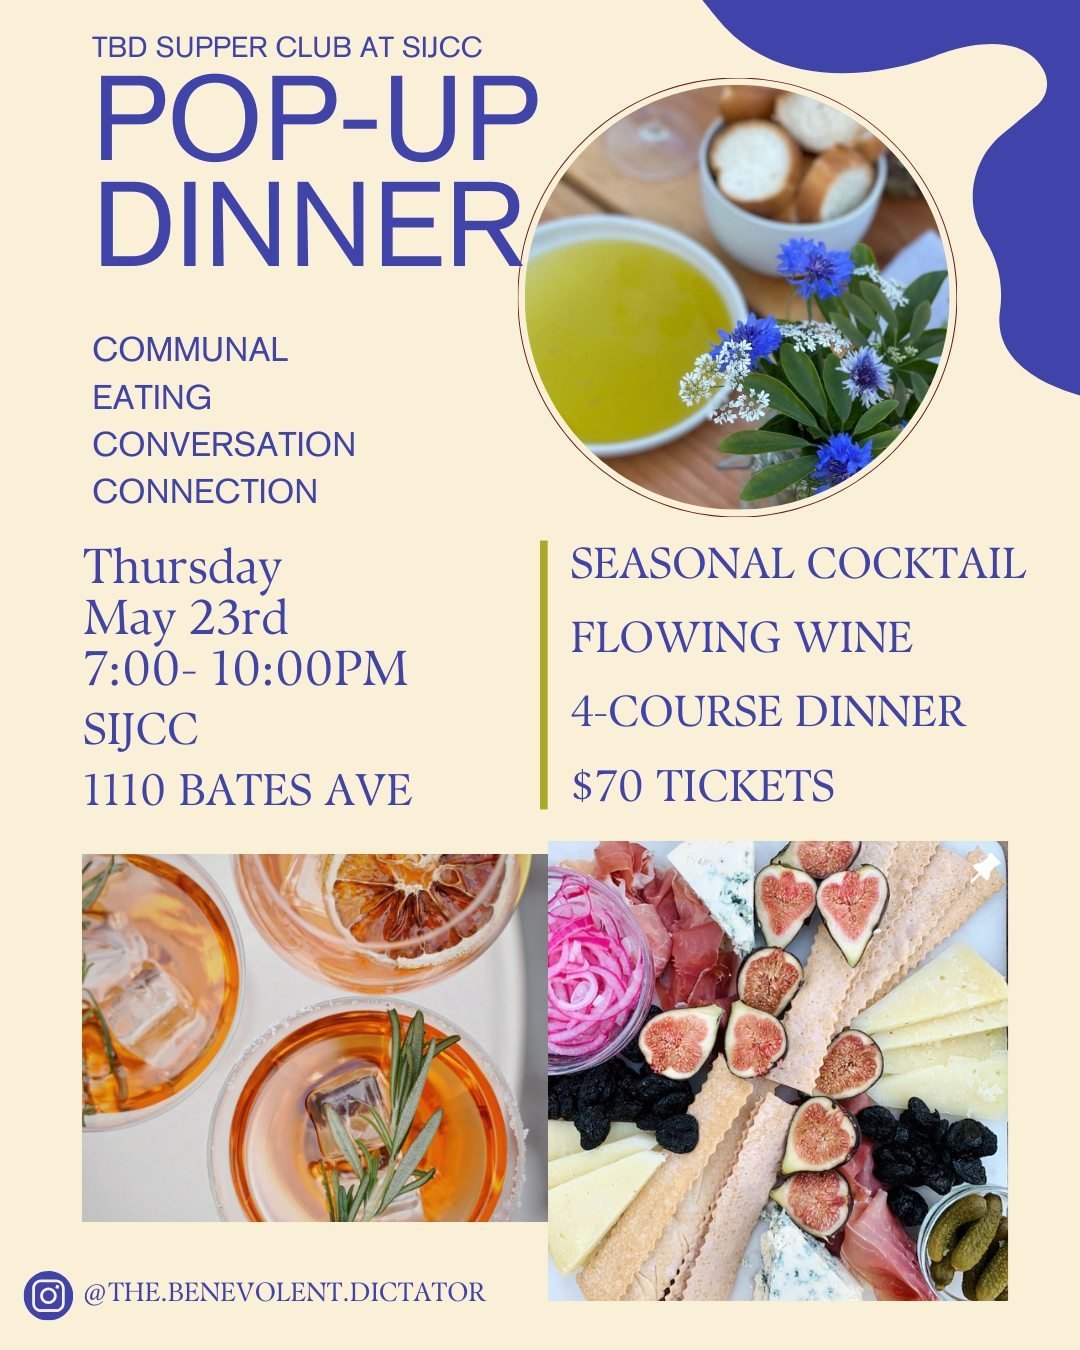 An evening of communal eating, conversation, and connection await you on Thursday May 23, in the SIJCC courtyard. ⁠
⁠
@the.benevolent.dictator (aka tbd) is a marriage of two great passions: feeding people and telling them stories. This supper club is